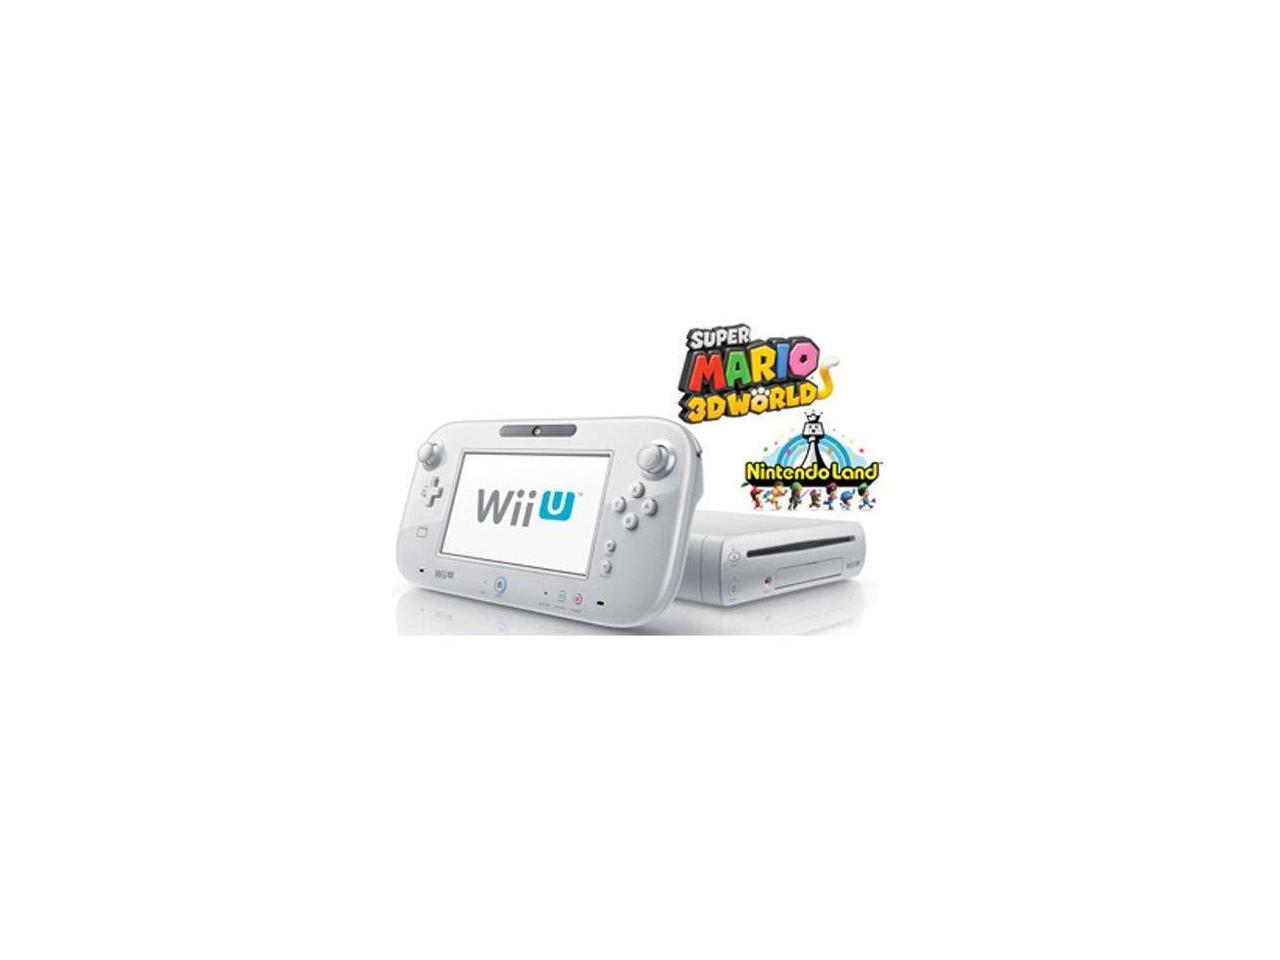 Refurbished Wii U Deluxe Set 8gb White With Super Mario 3d World And Nintendo Land Newegg Com